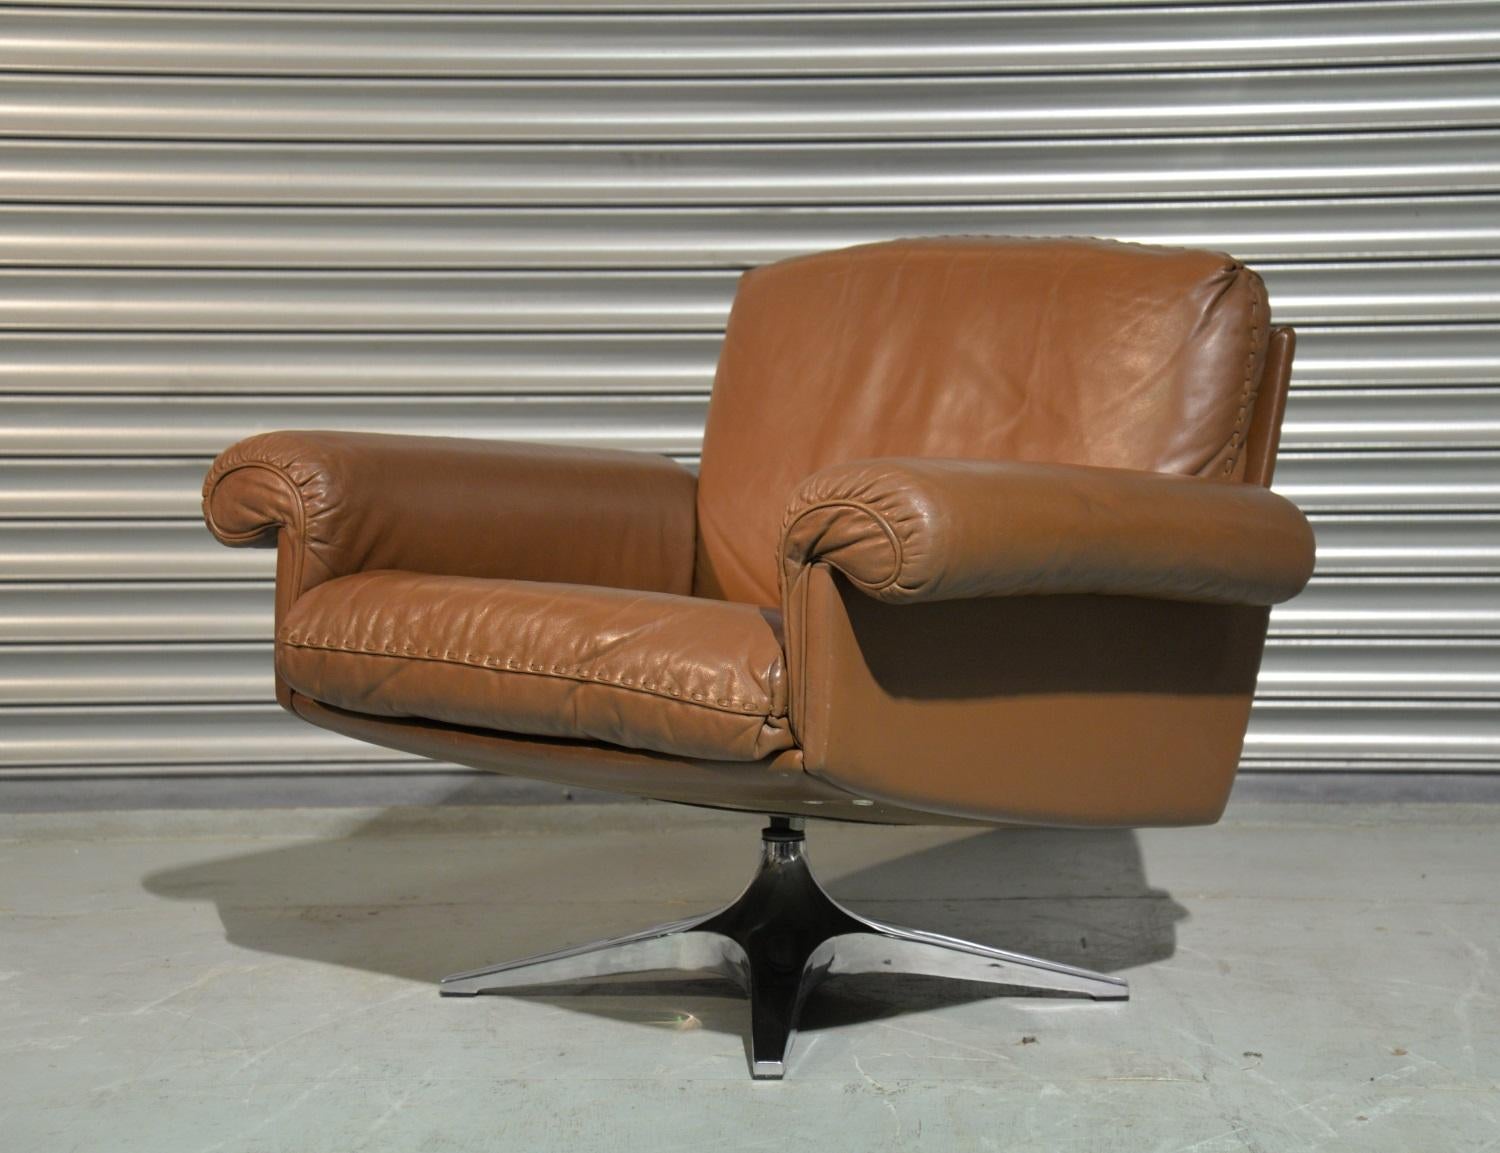 Discounted airfreight for our US and International customers. (from 2 weeks door to door)

We are delighted to bring to you a vintage 1970`s de Sede DS 31 lounge armchair in soft brown aniline leather with superb whipstitch edge detail. This swivel